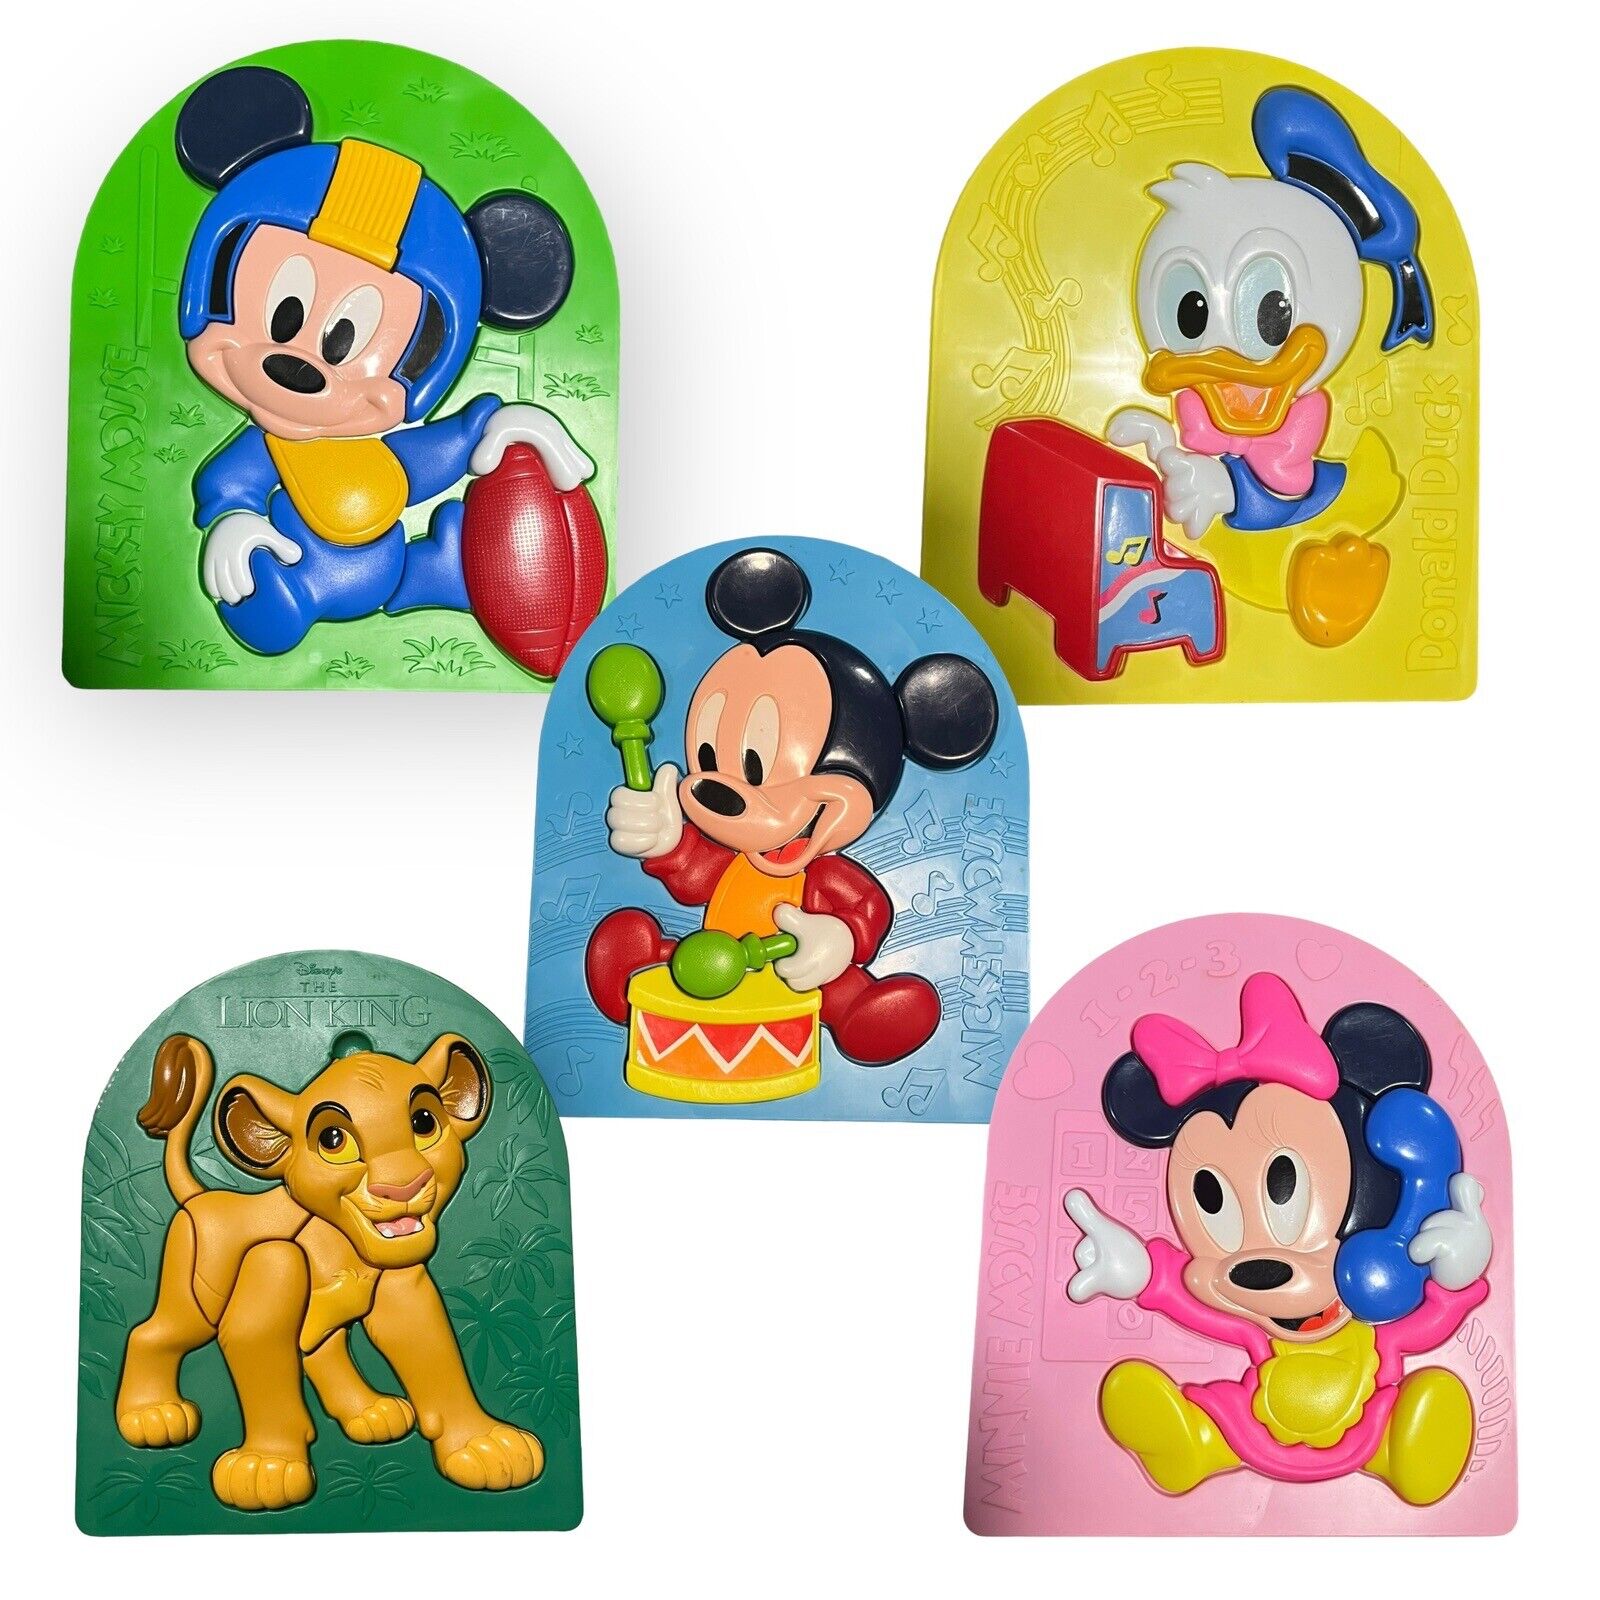 Disney 3d Puzzle Plastic Tray Baby Toy Vintage (c)1984 - Lot Of 5 Puzzles